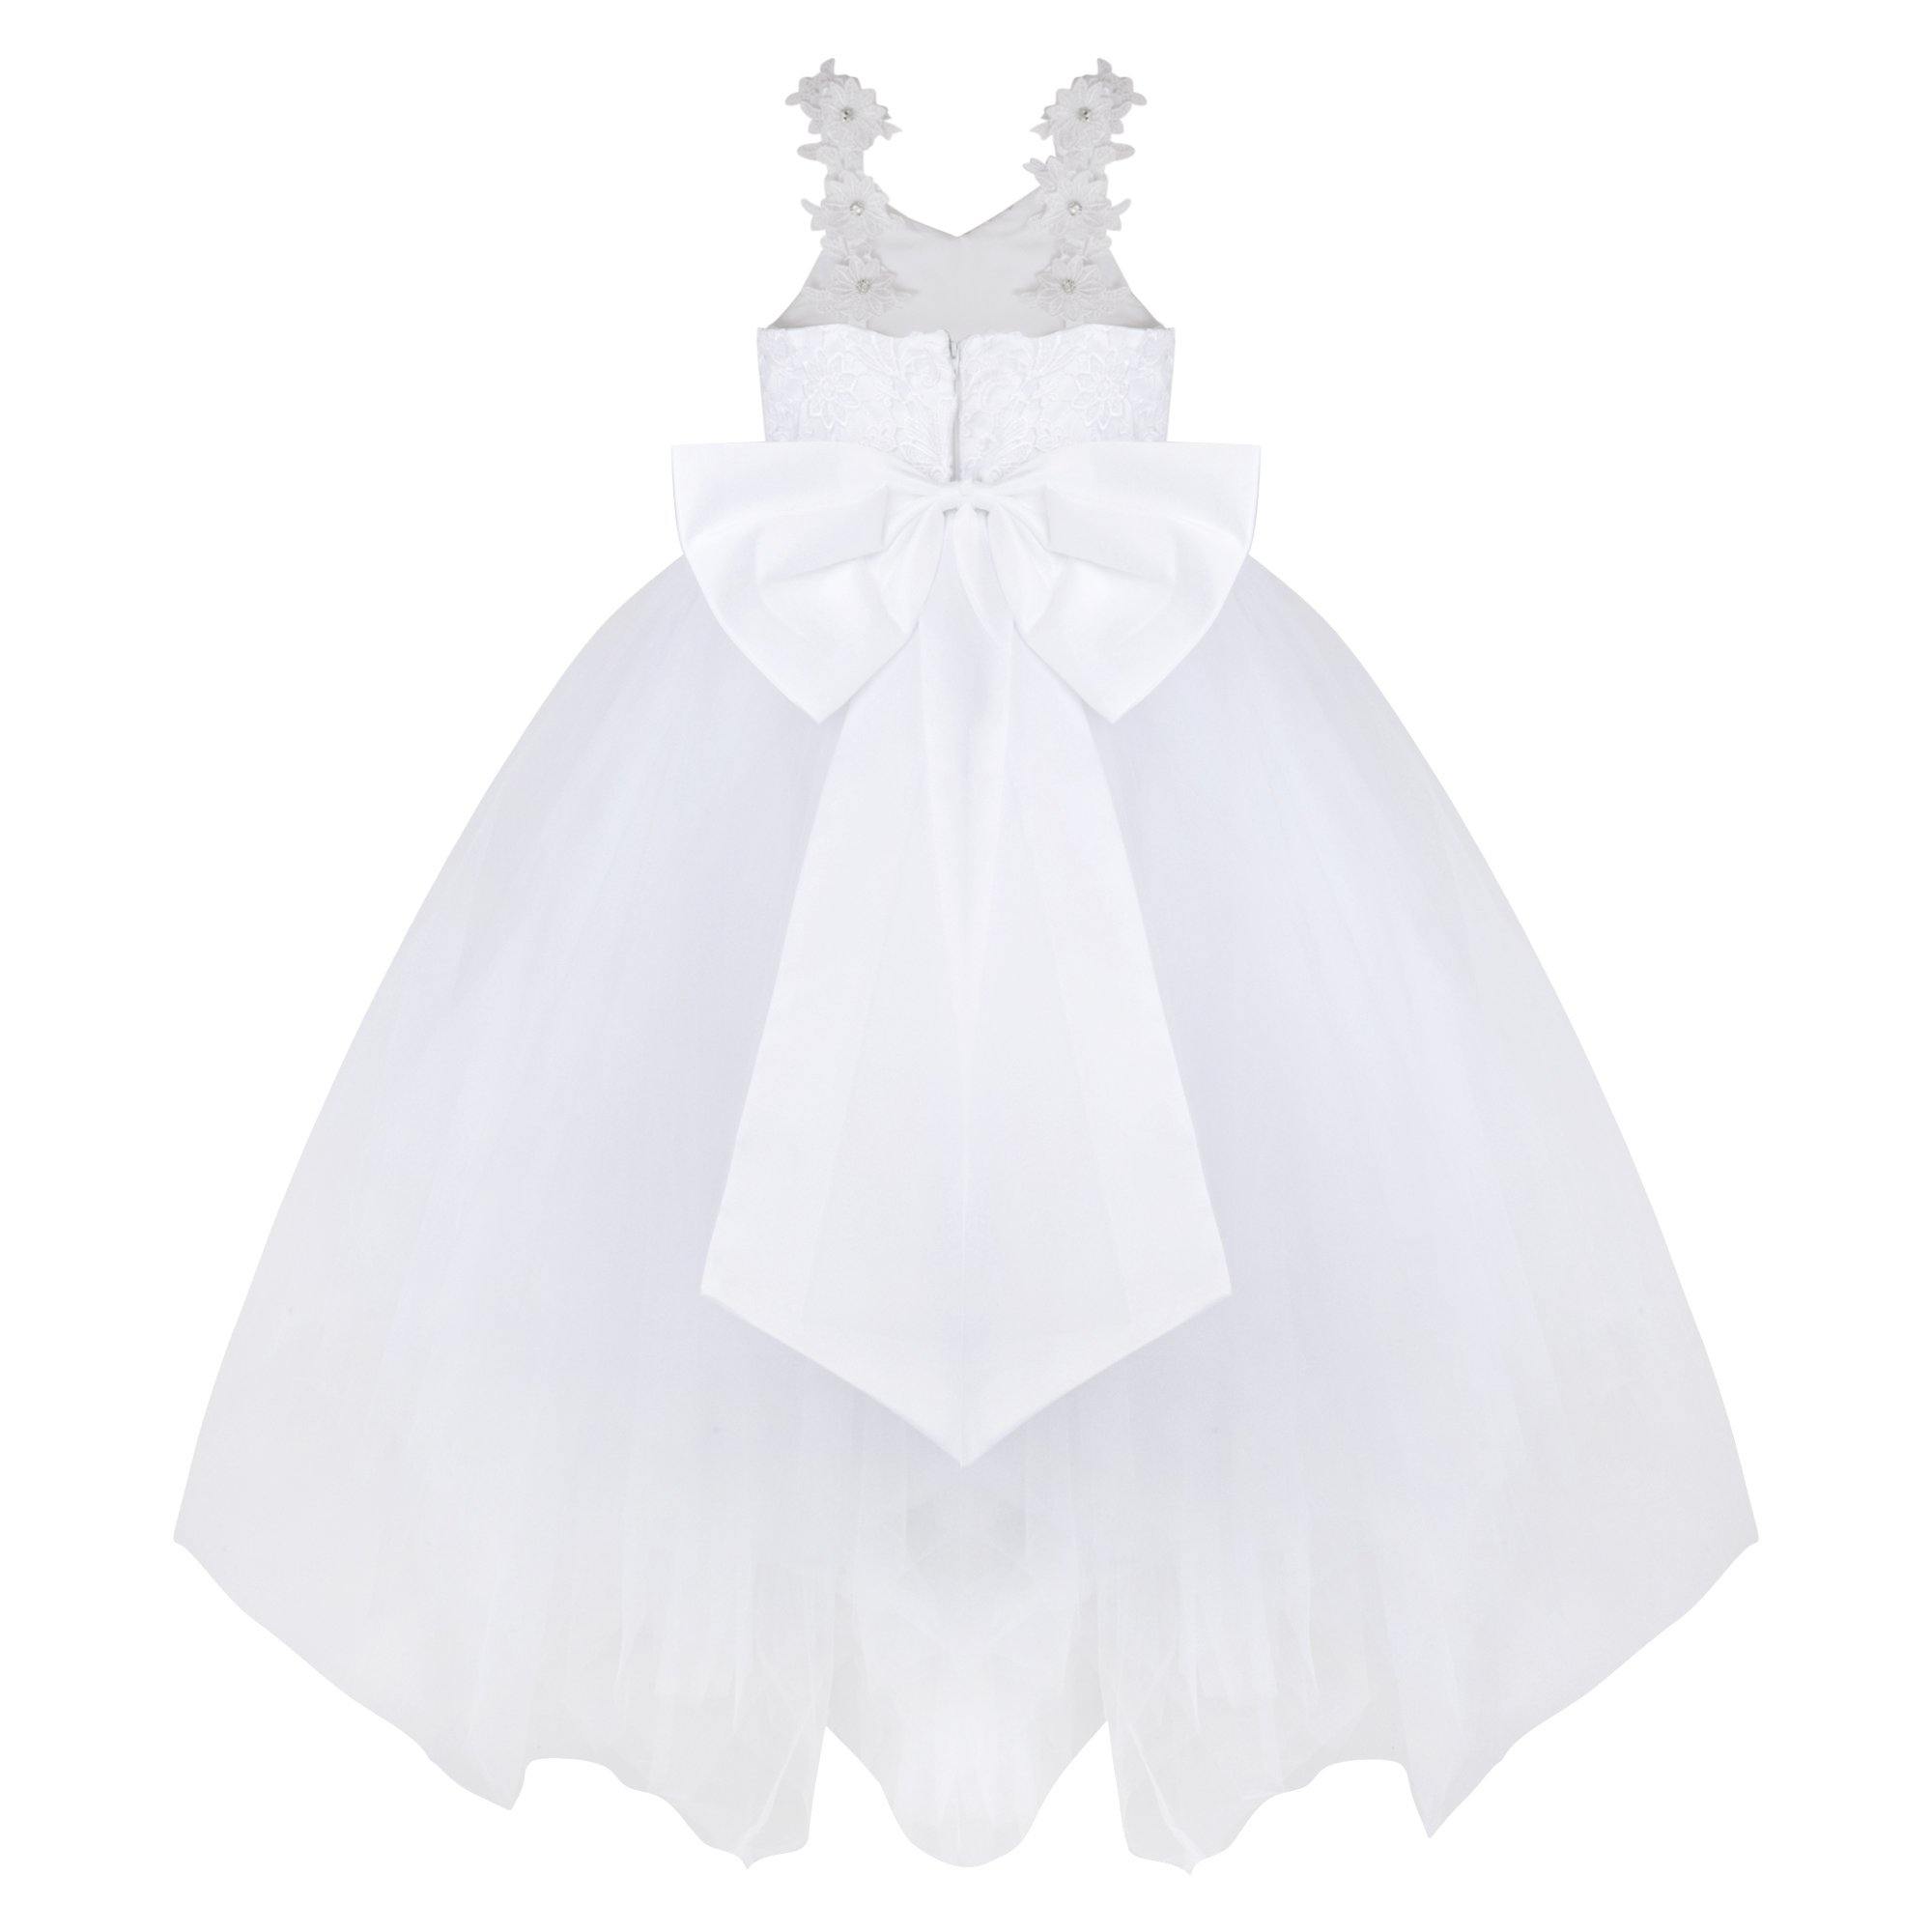 Princess Marilyn - White dress for The Fairy Princess Shop